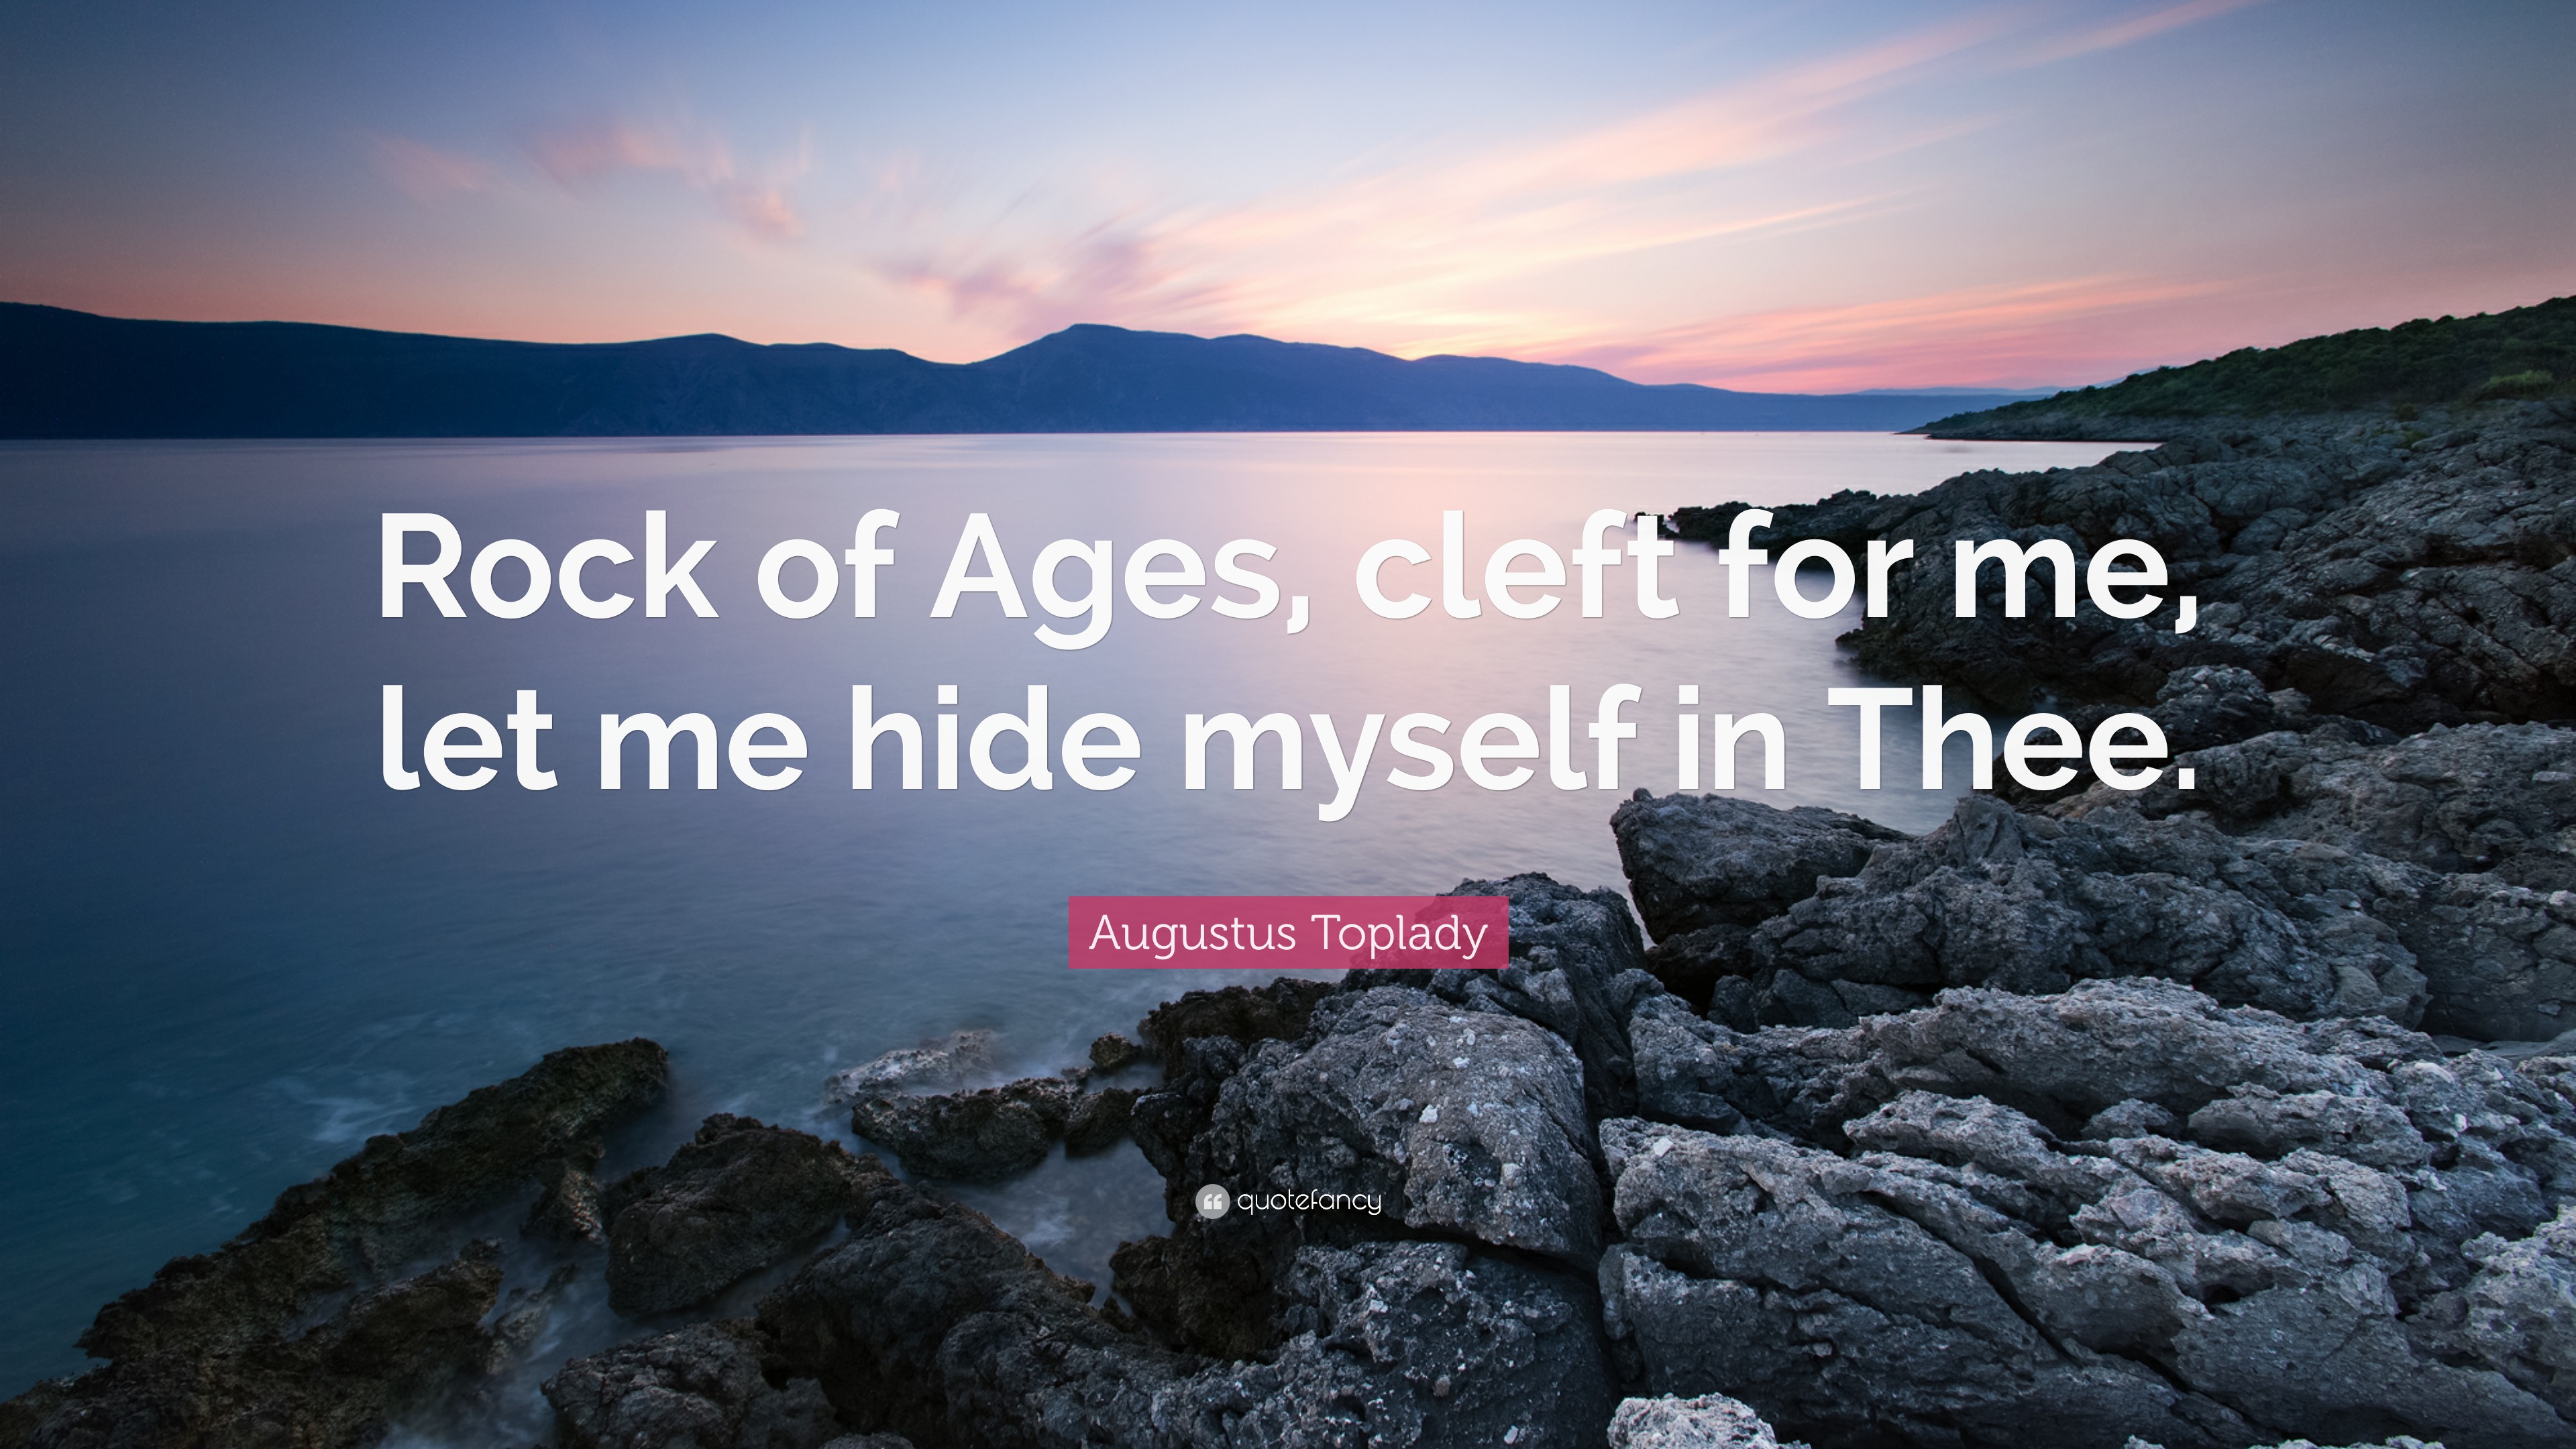 Augustus Toplady Quote “Rock of Ages, cleft for me, let